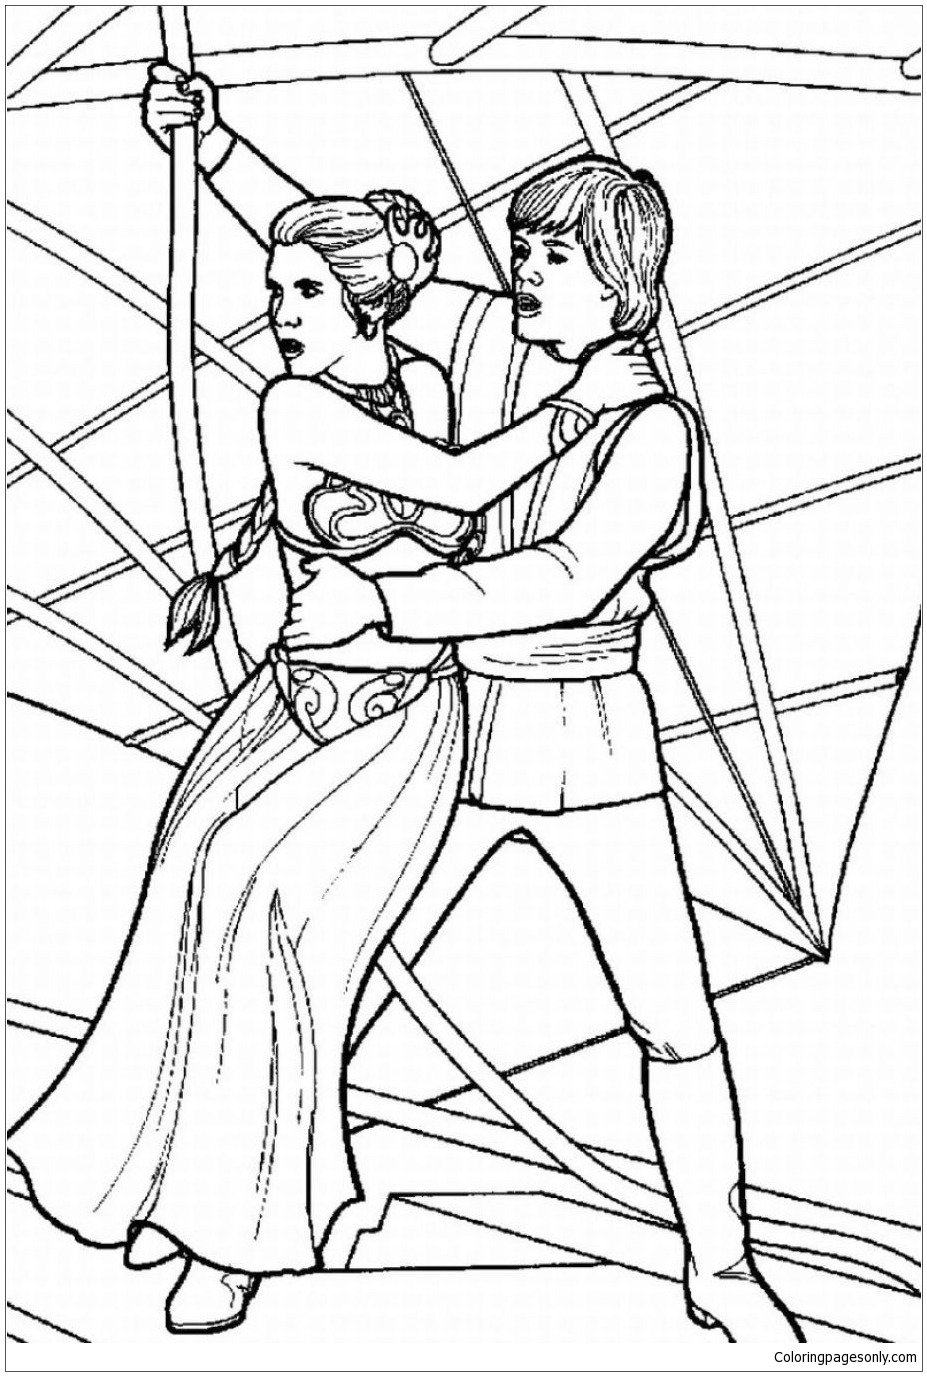 Remarkable Star Wars Coloring Pages